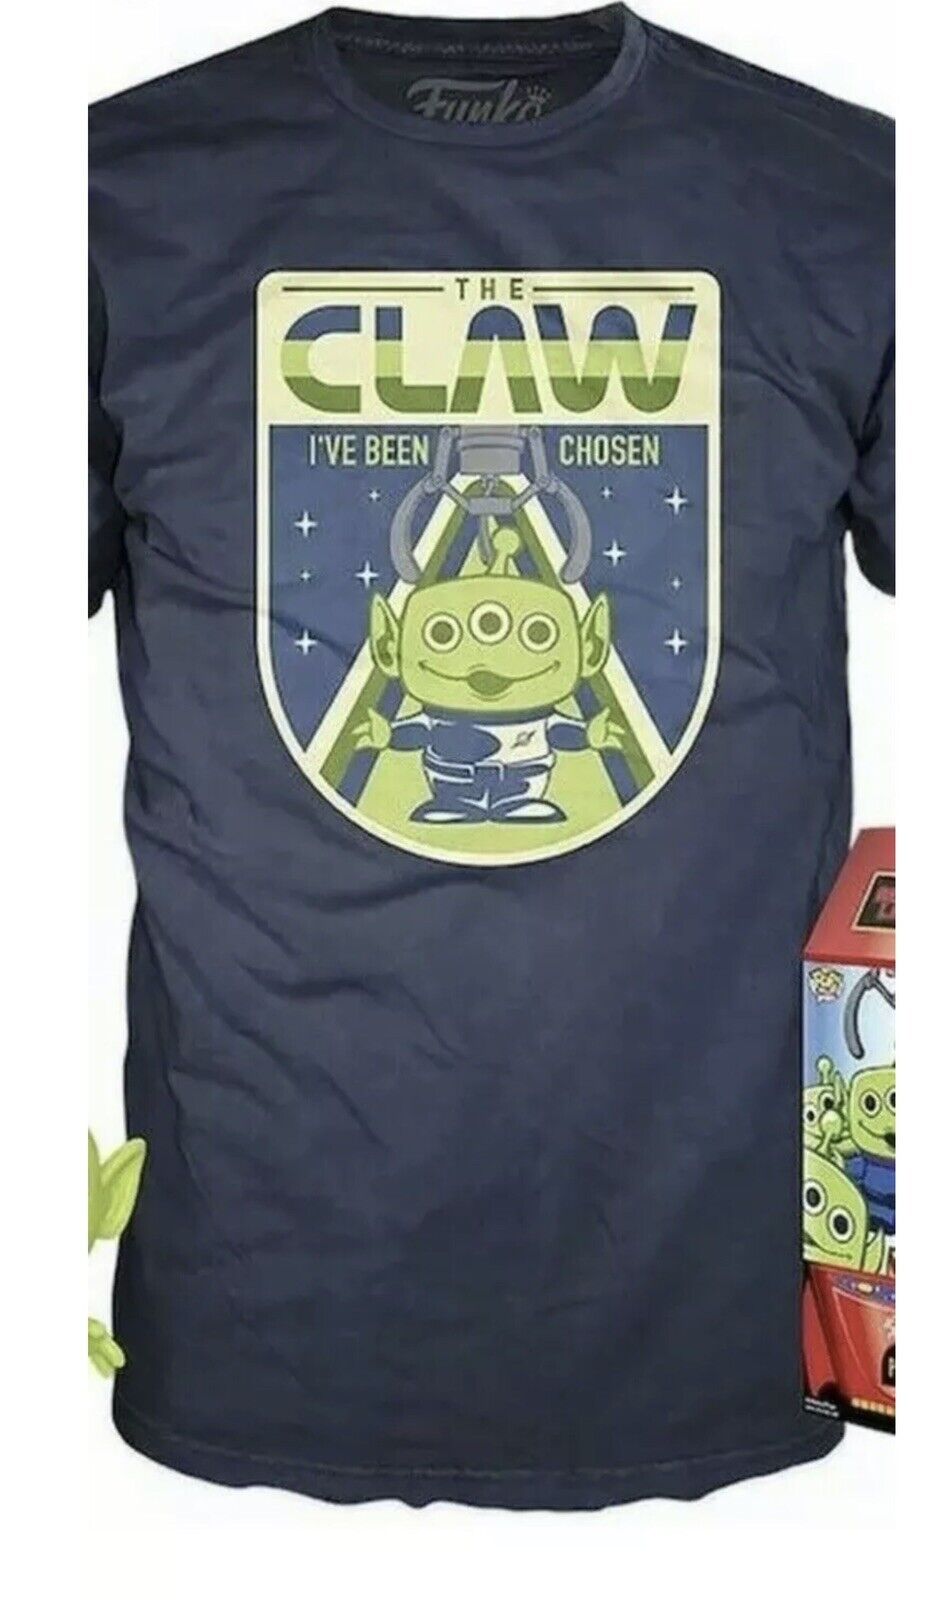 Funko POP! Tees 'The Claw' Toy Story Alien T-shirt FYE Exclusive Size: Medium